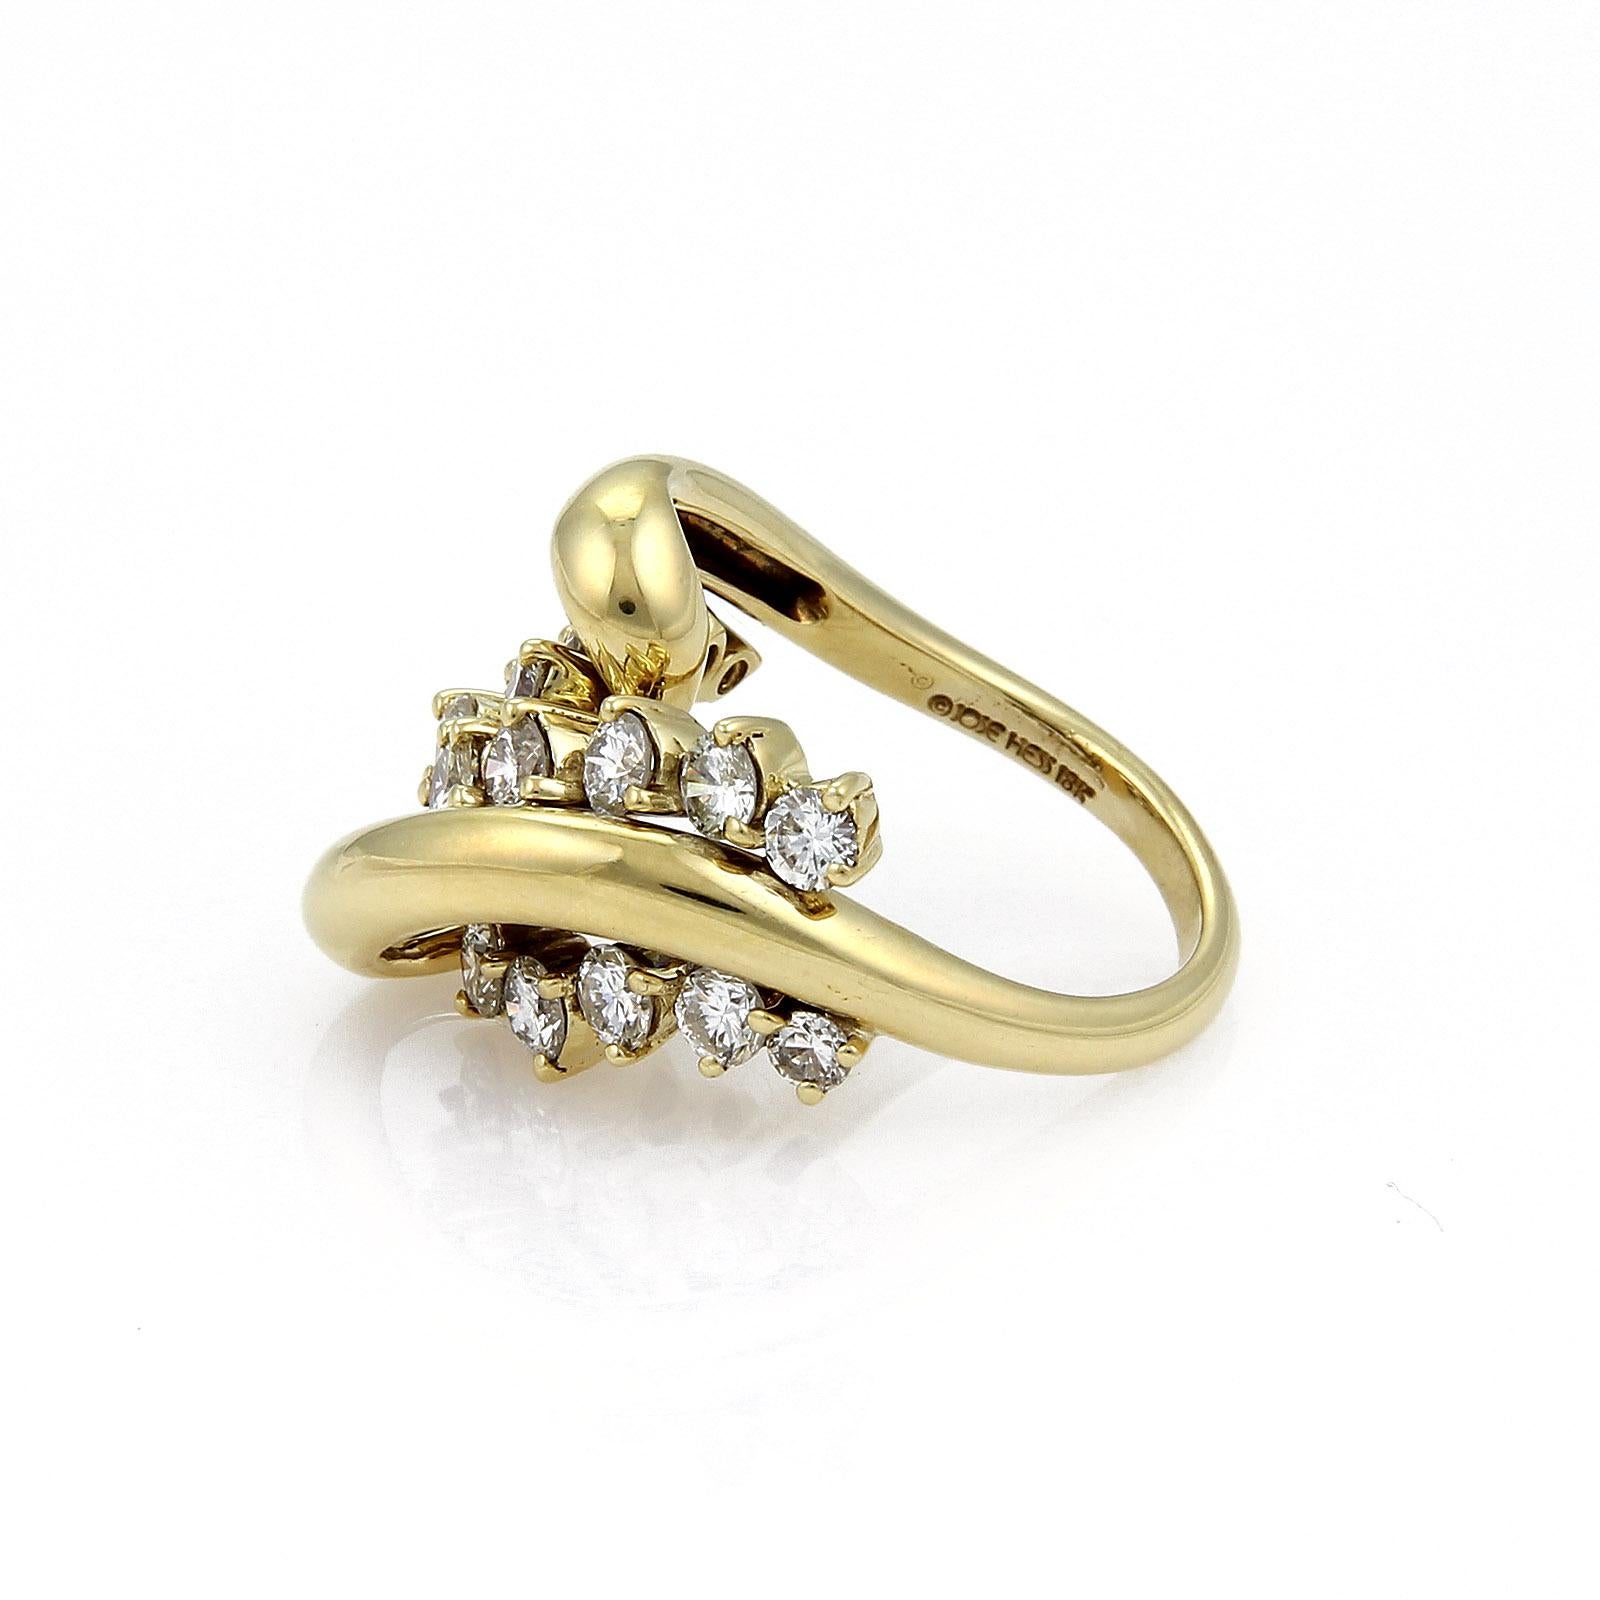 This gorgeous authentic ring is by Jose Hess, well crafted from solid 18k yellow gold with a high polished finish, it features a high curved open loop with round cut prong set diamonds mounted between the loops. The diamonds has a total weight of 2